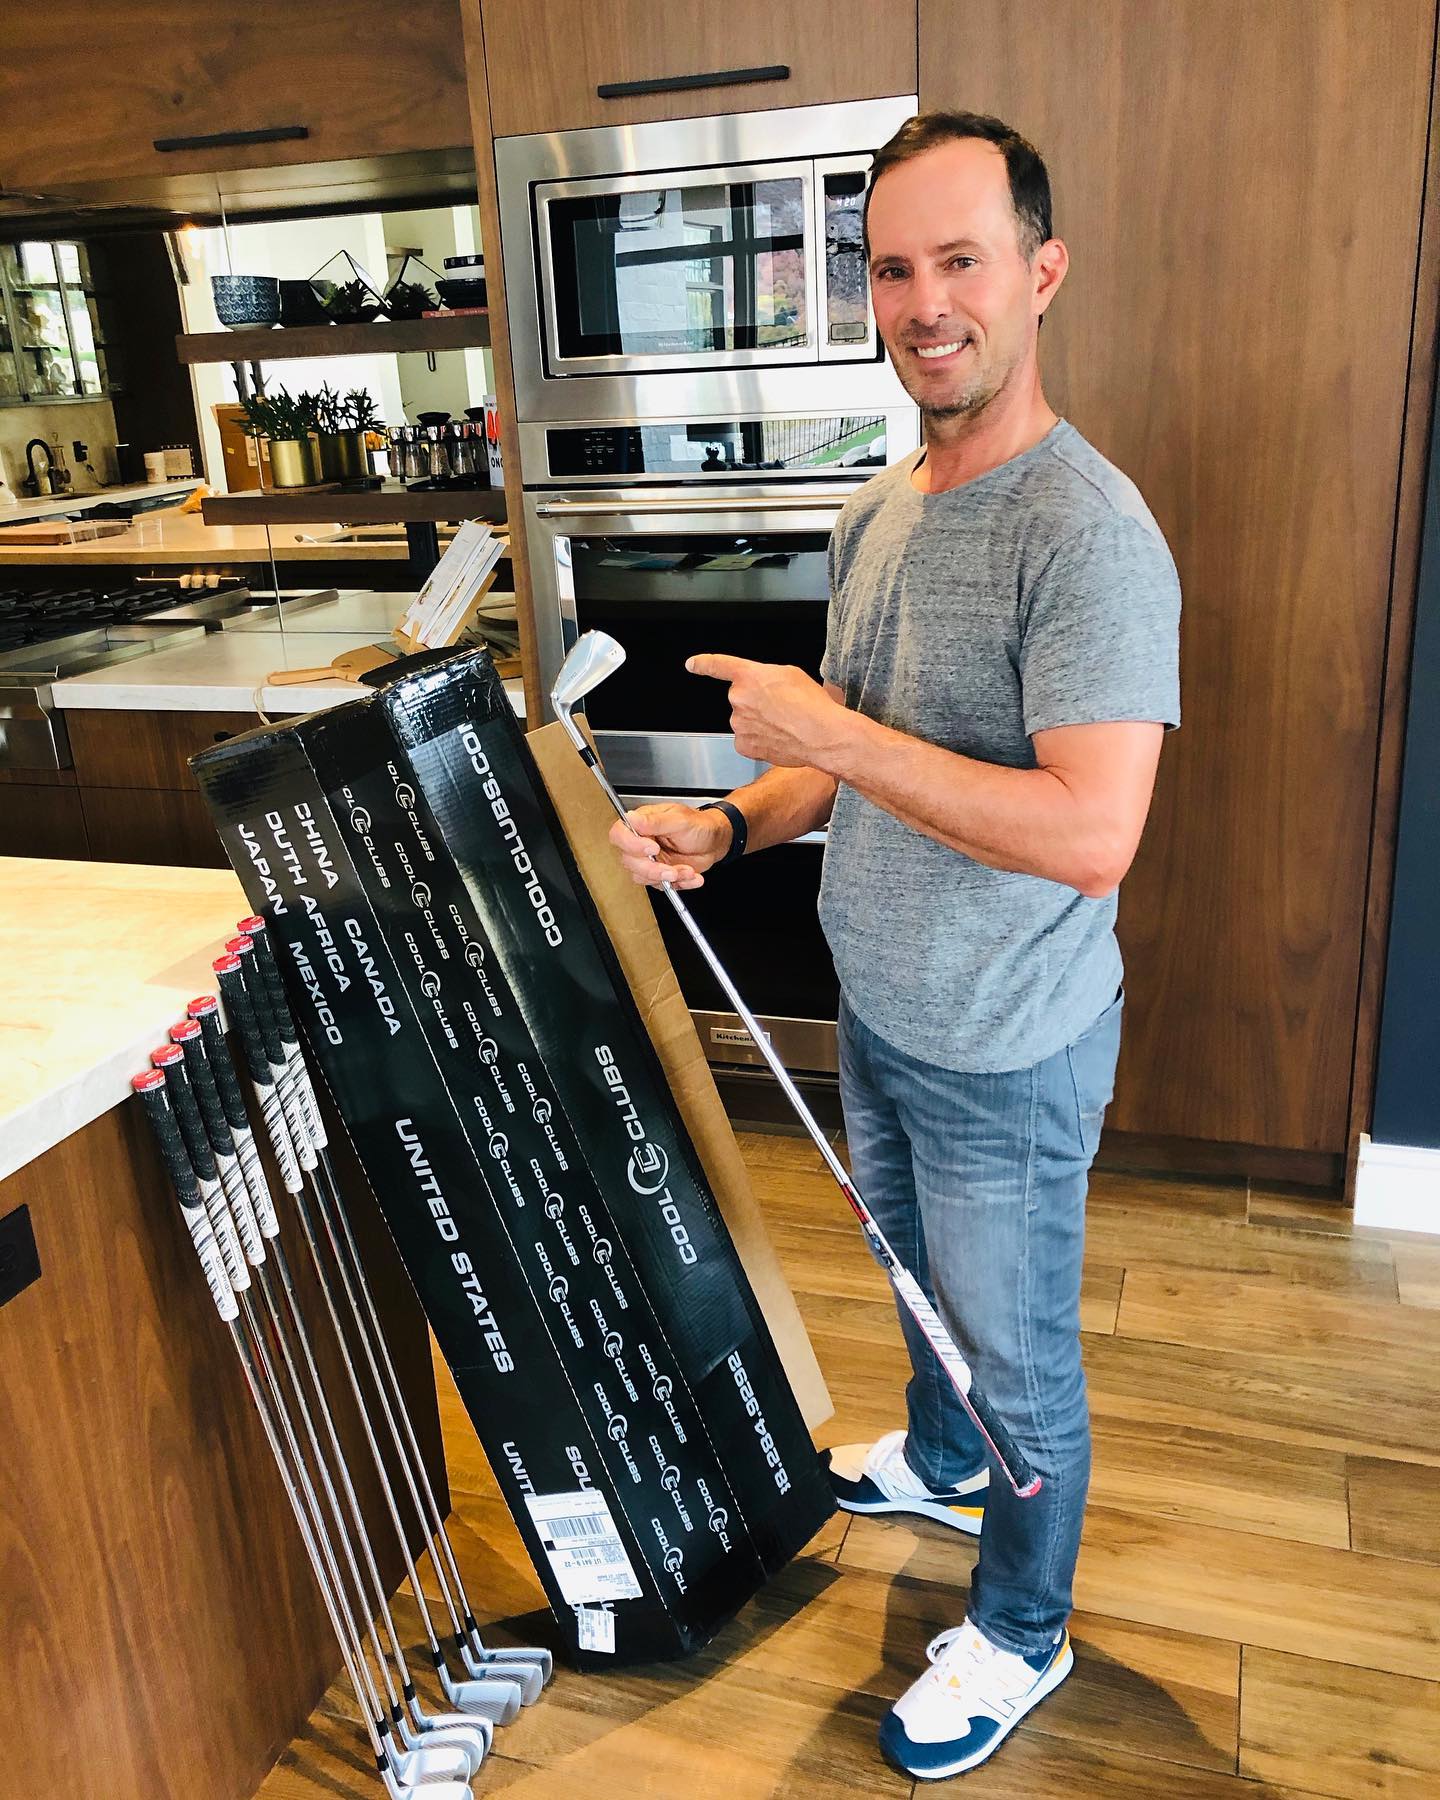 Mike Weir With His Taylor Made Golf Clubs